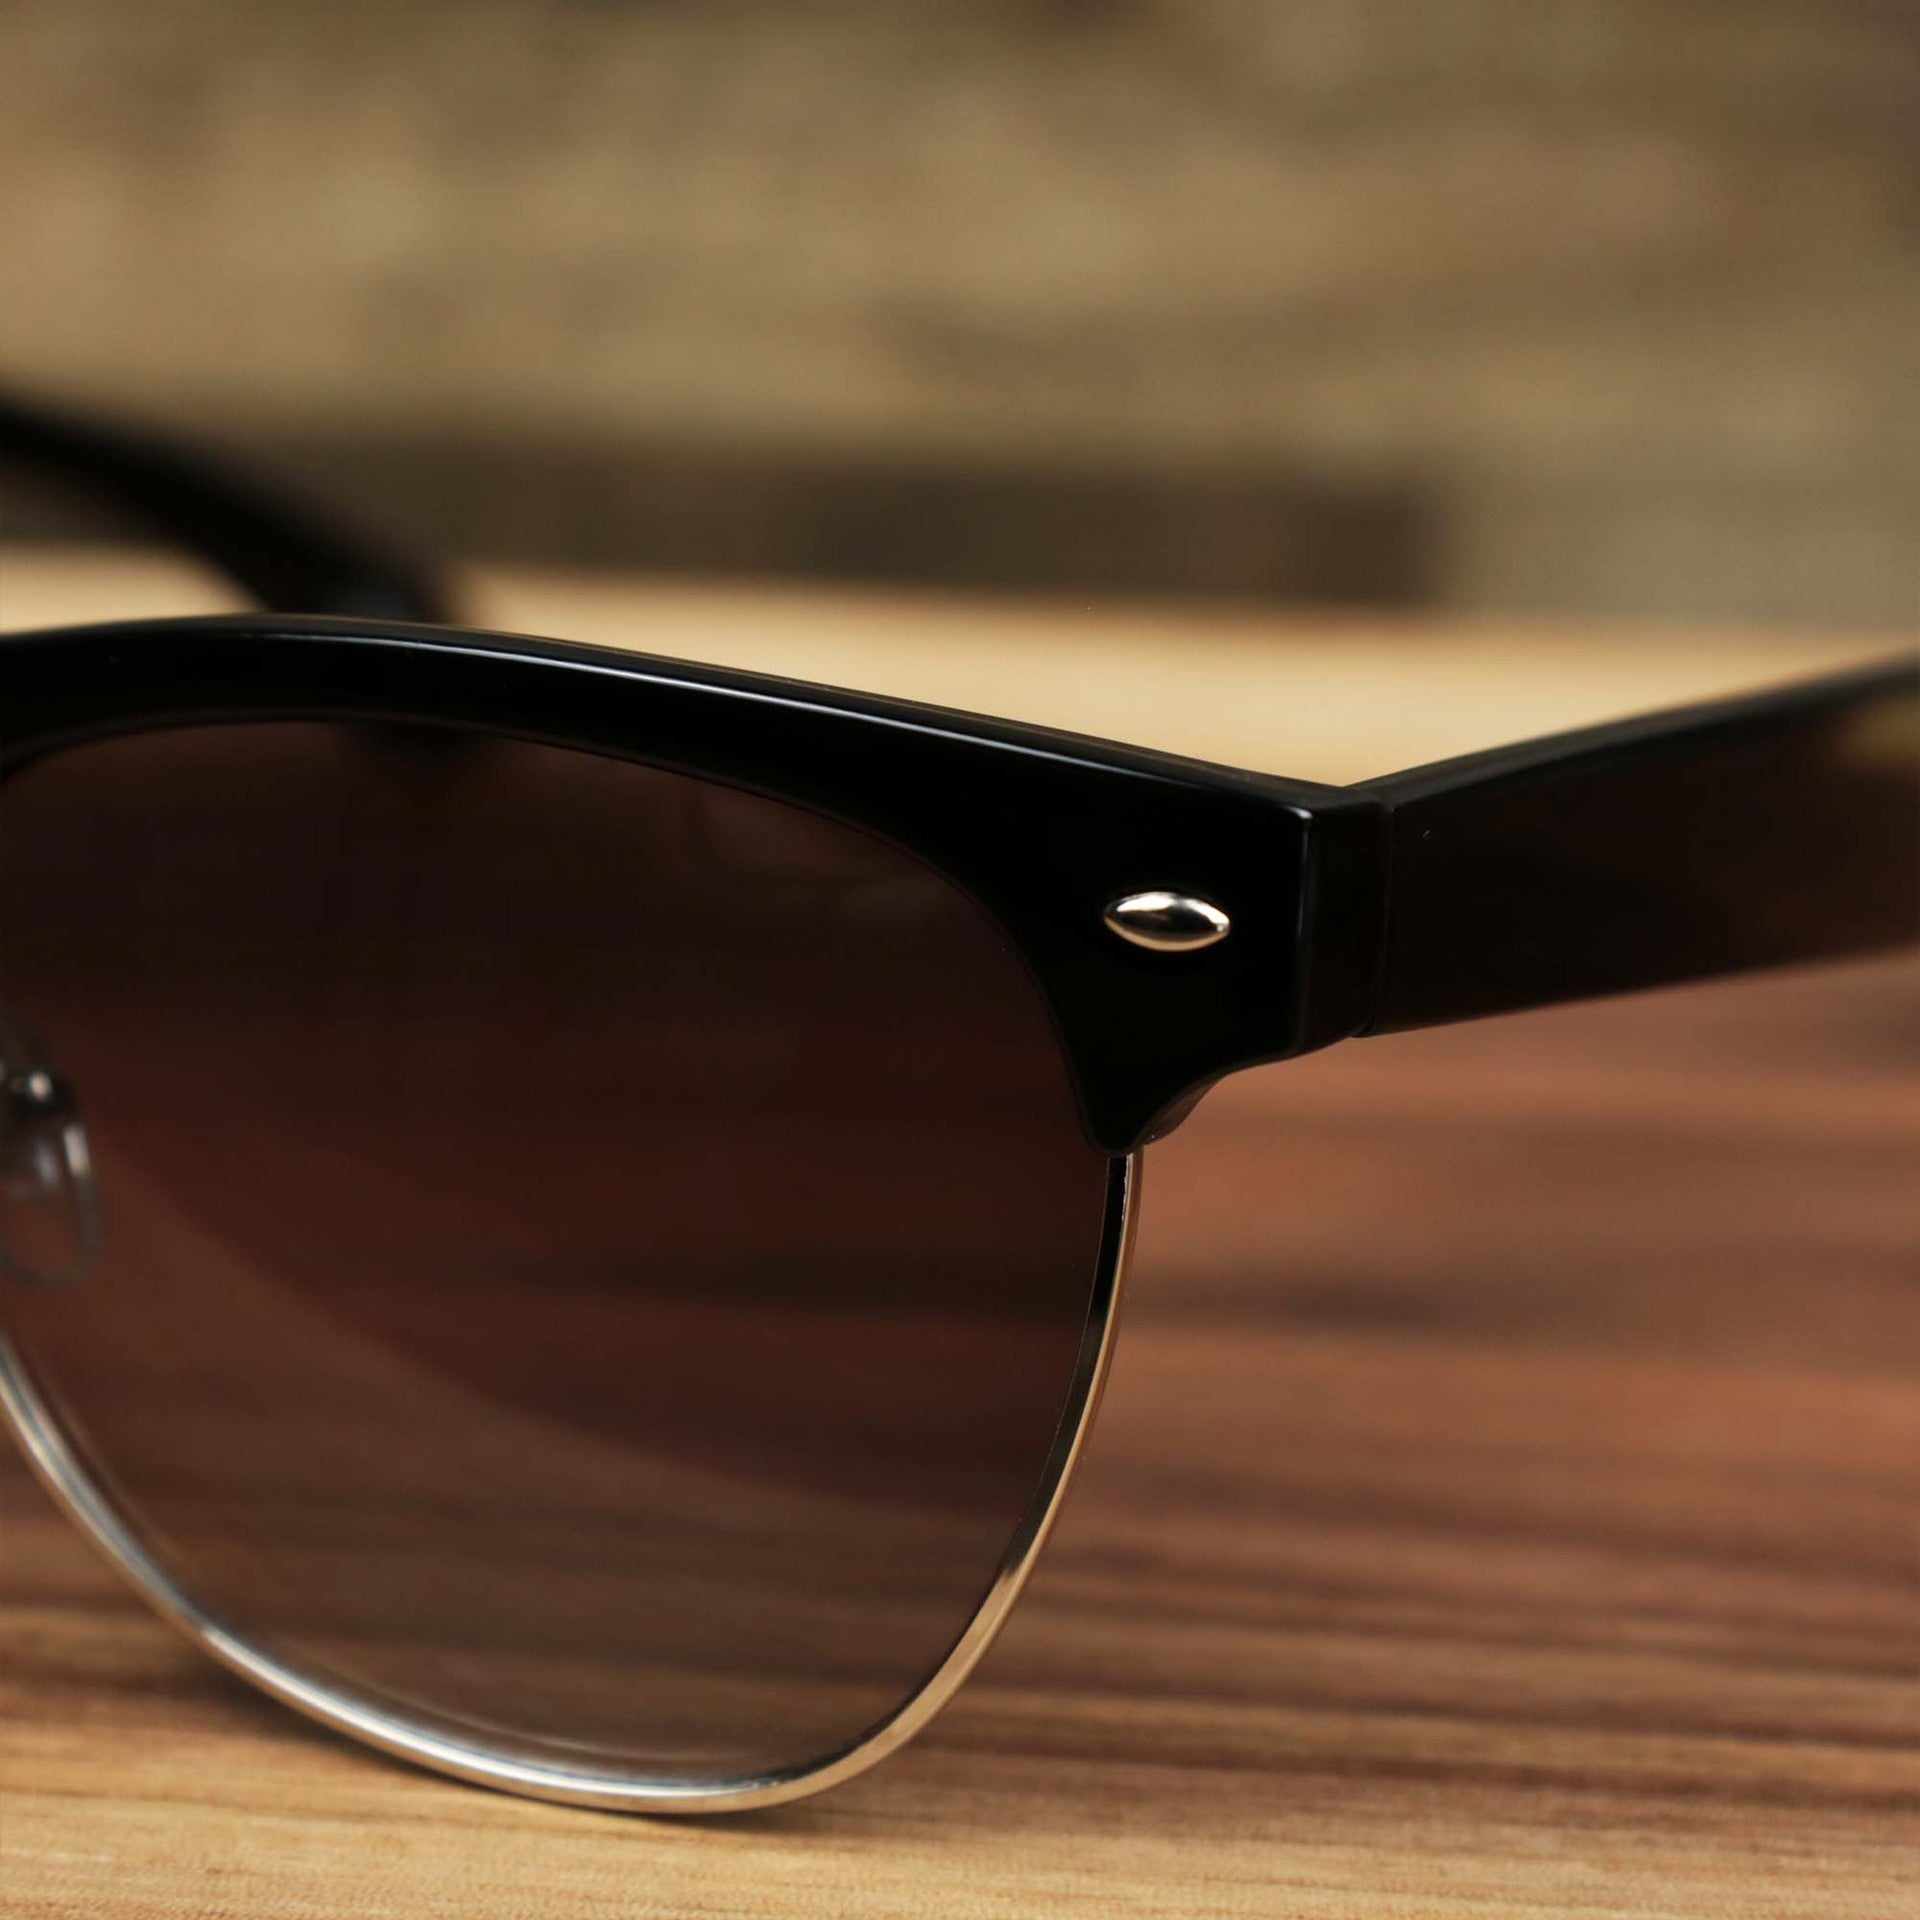 The hinge on the Thick Top and Metal Bottom Frame Black Lens Sunglasses with Black Frame